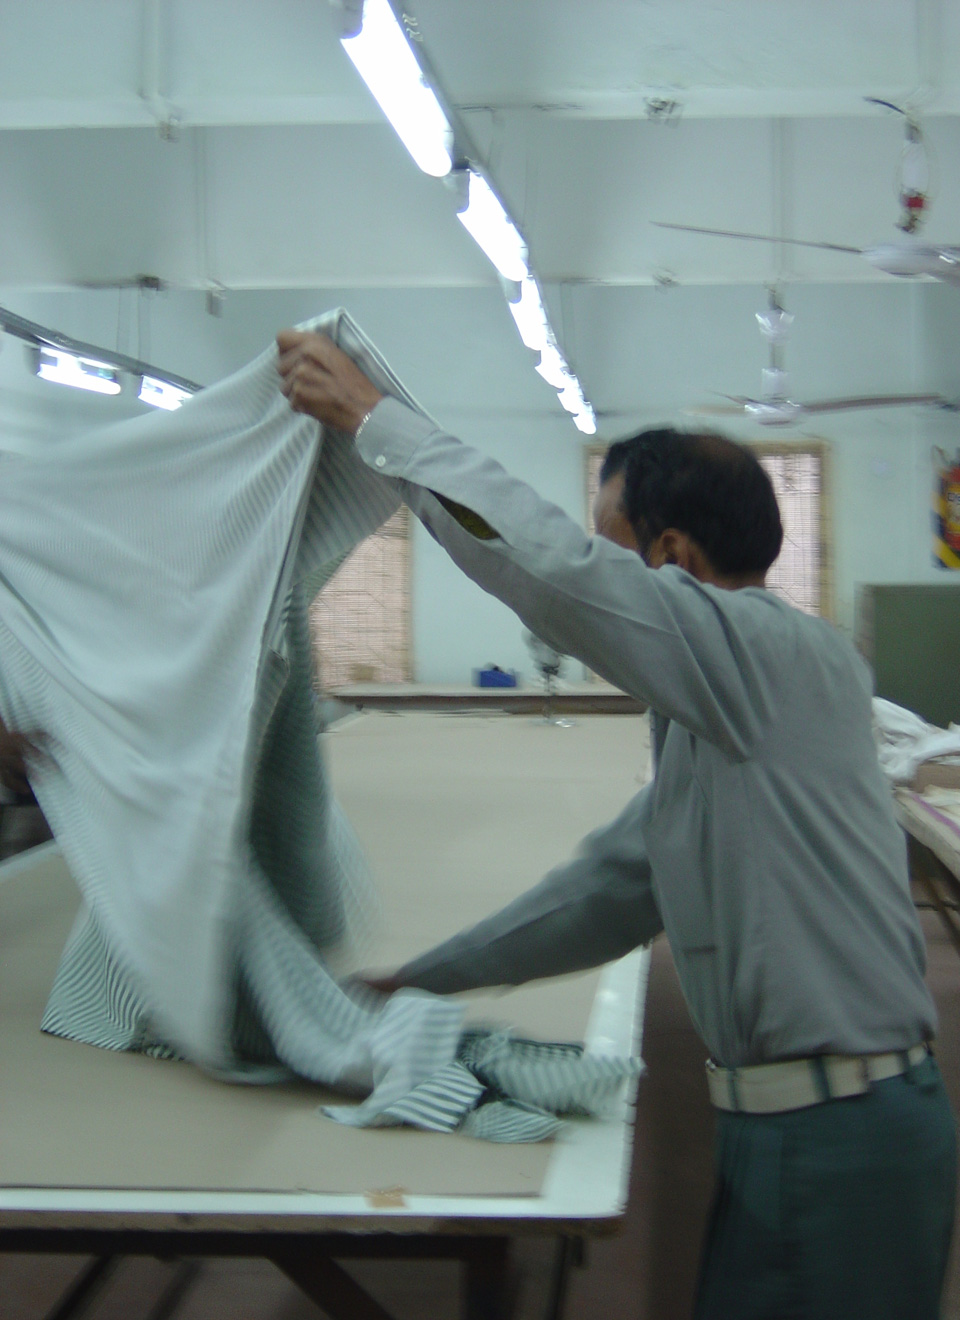 our erstwhile master, the late Jamil Ahmed, layering the fabric for machine cutting.